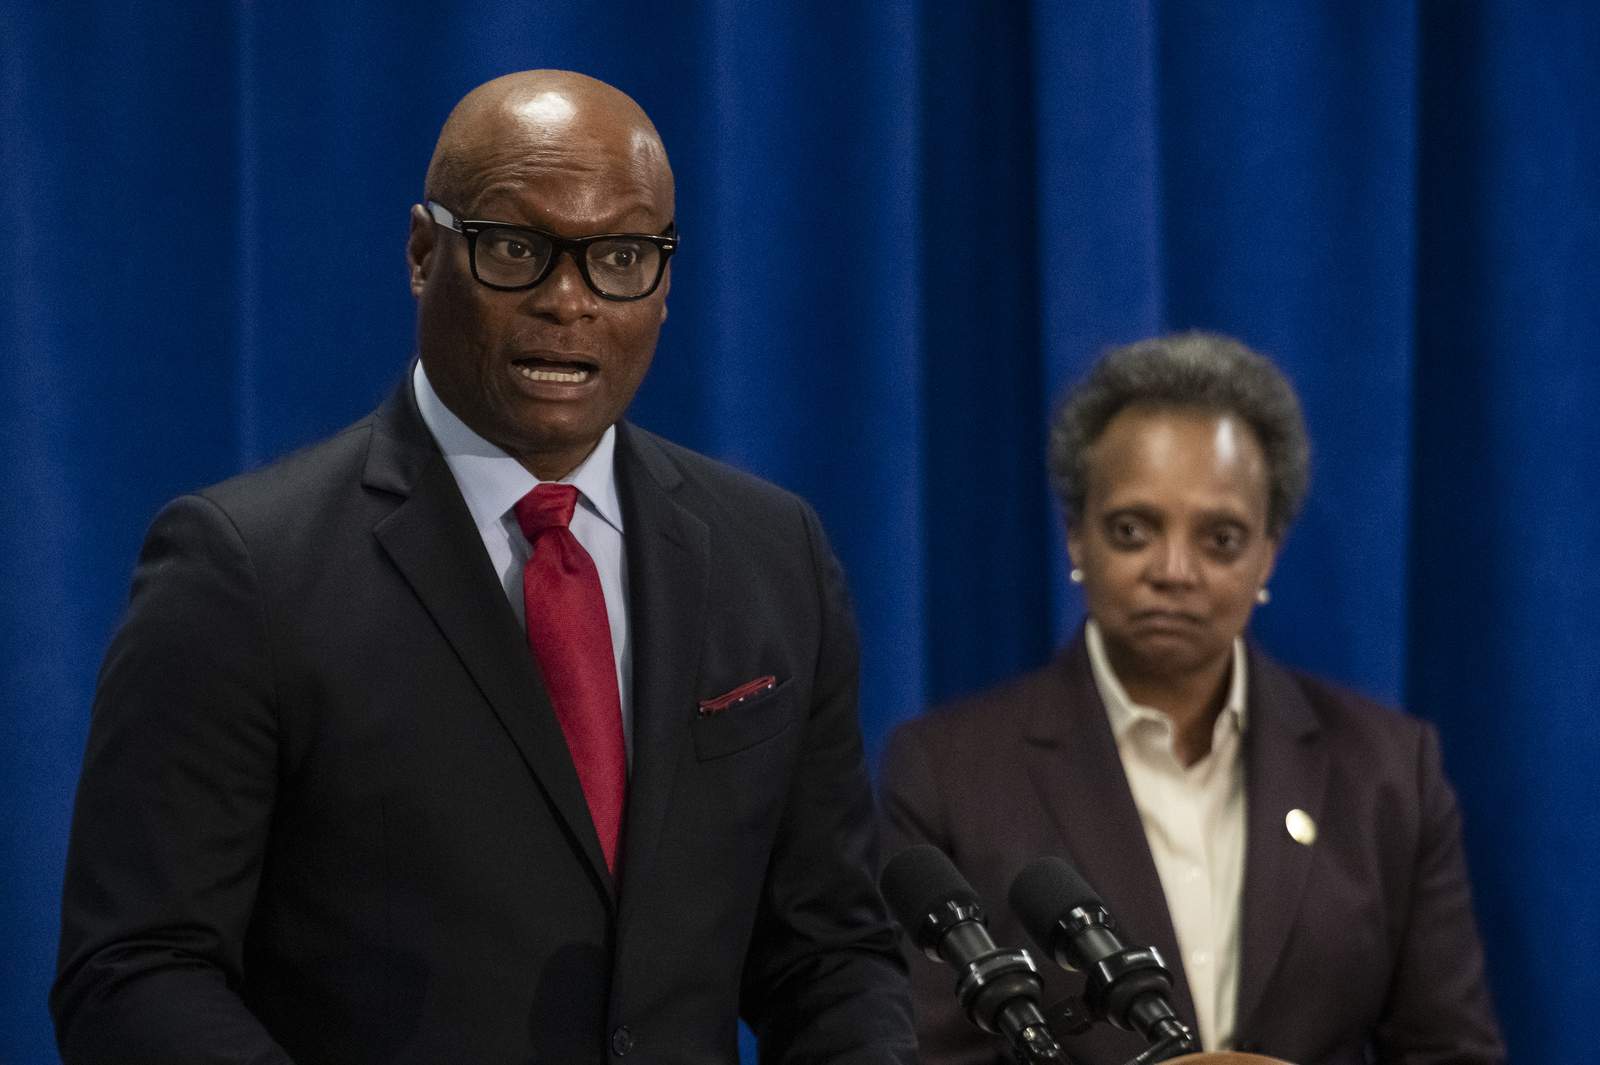 Mayor taps ex-Dallas chief to head Chicago police force